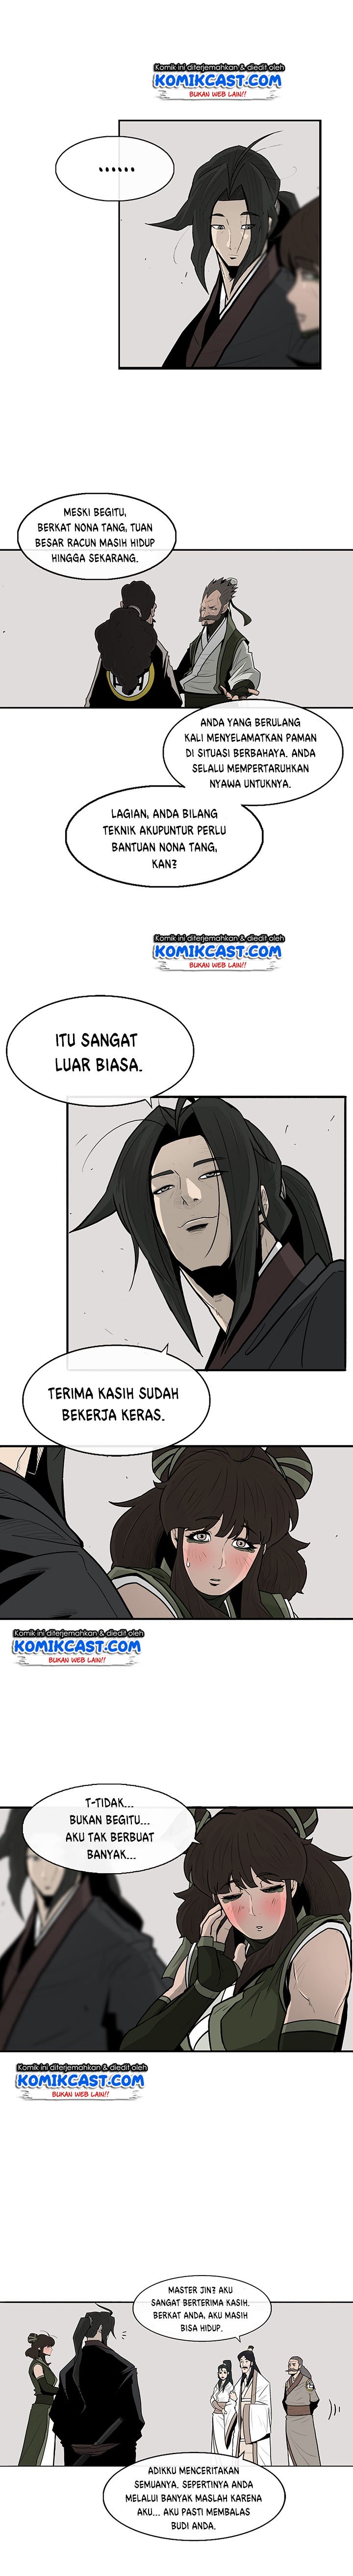 Legend Of The Northern Blade Chapter 59